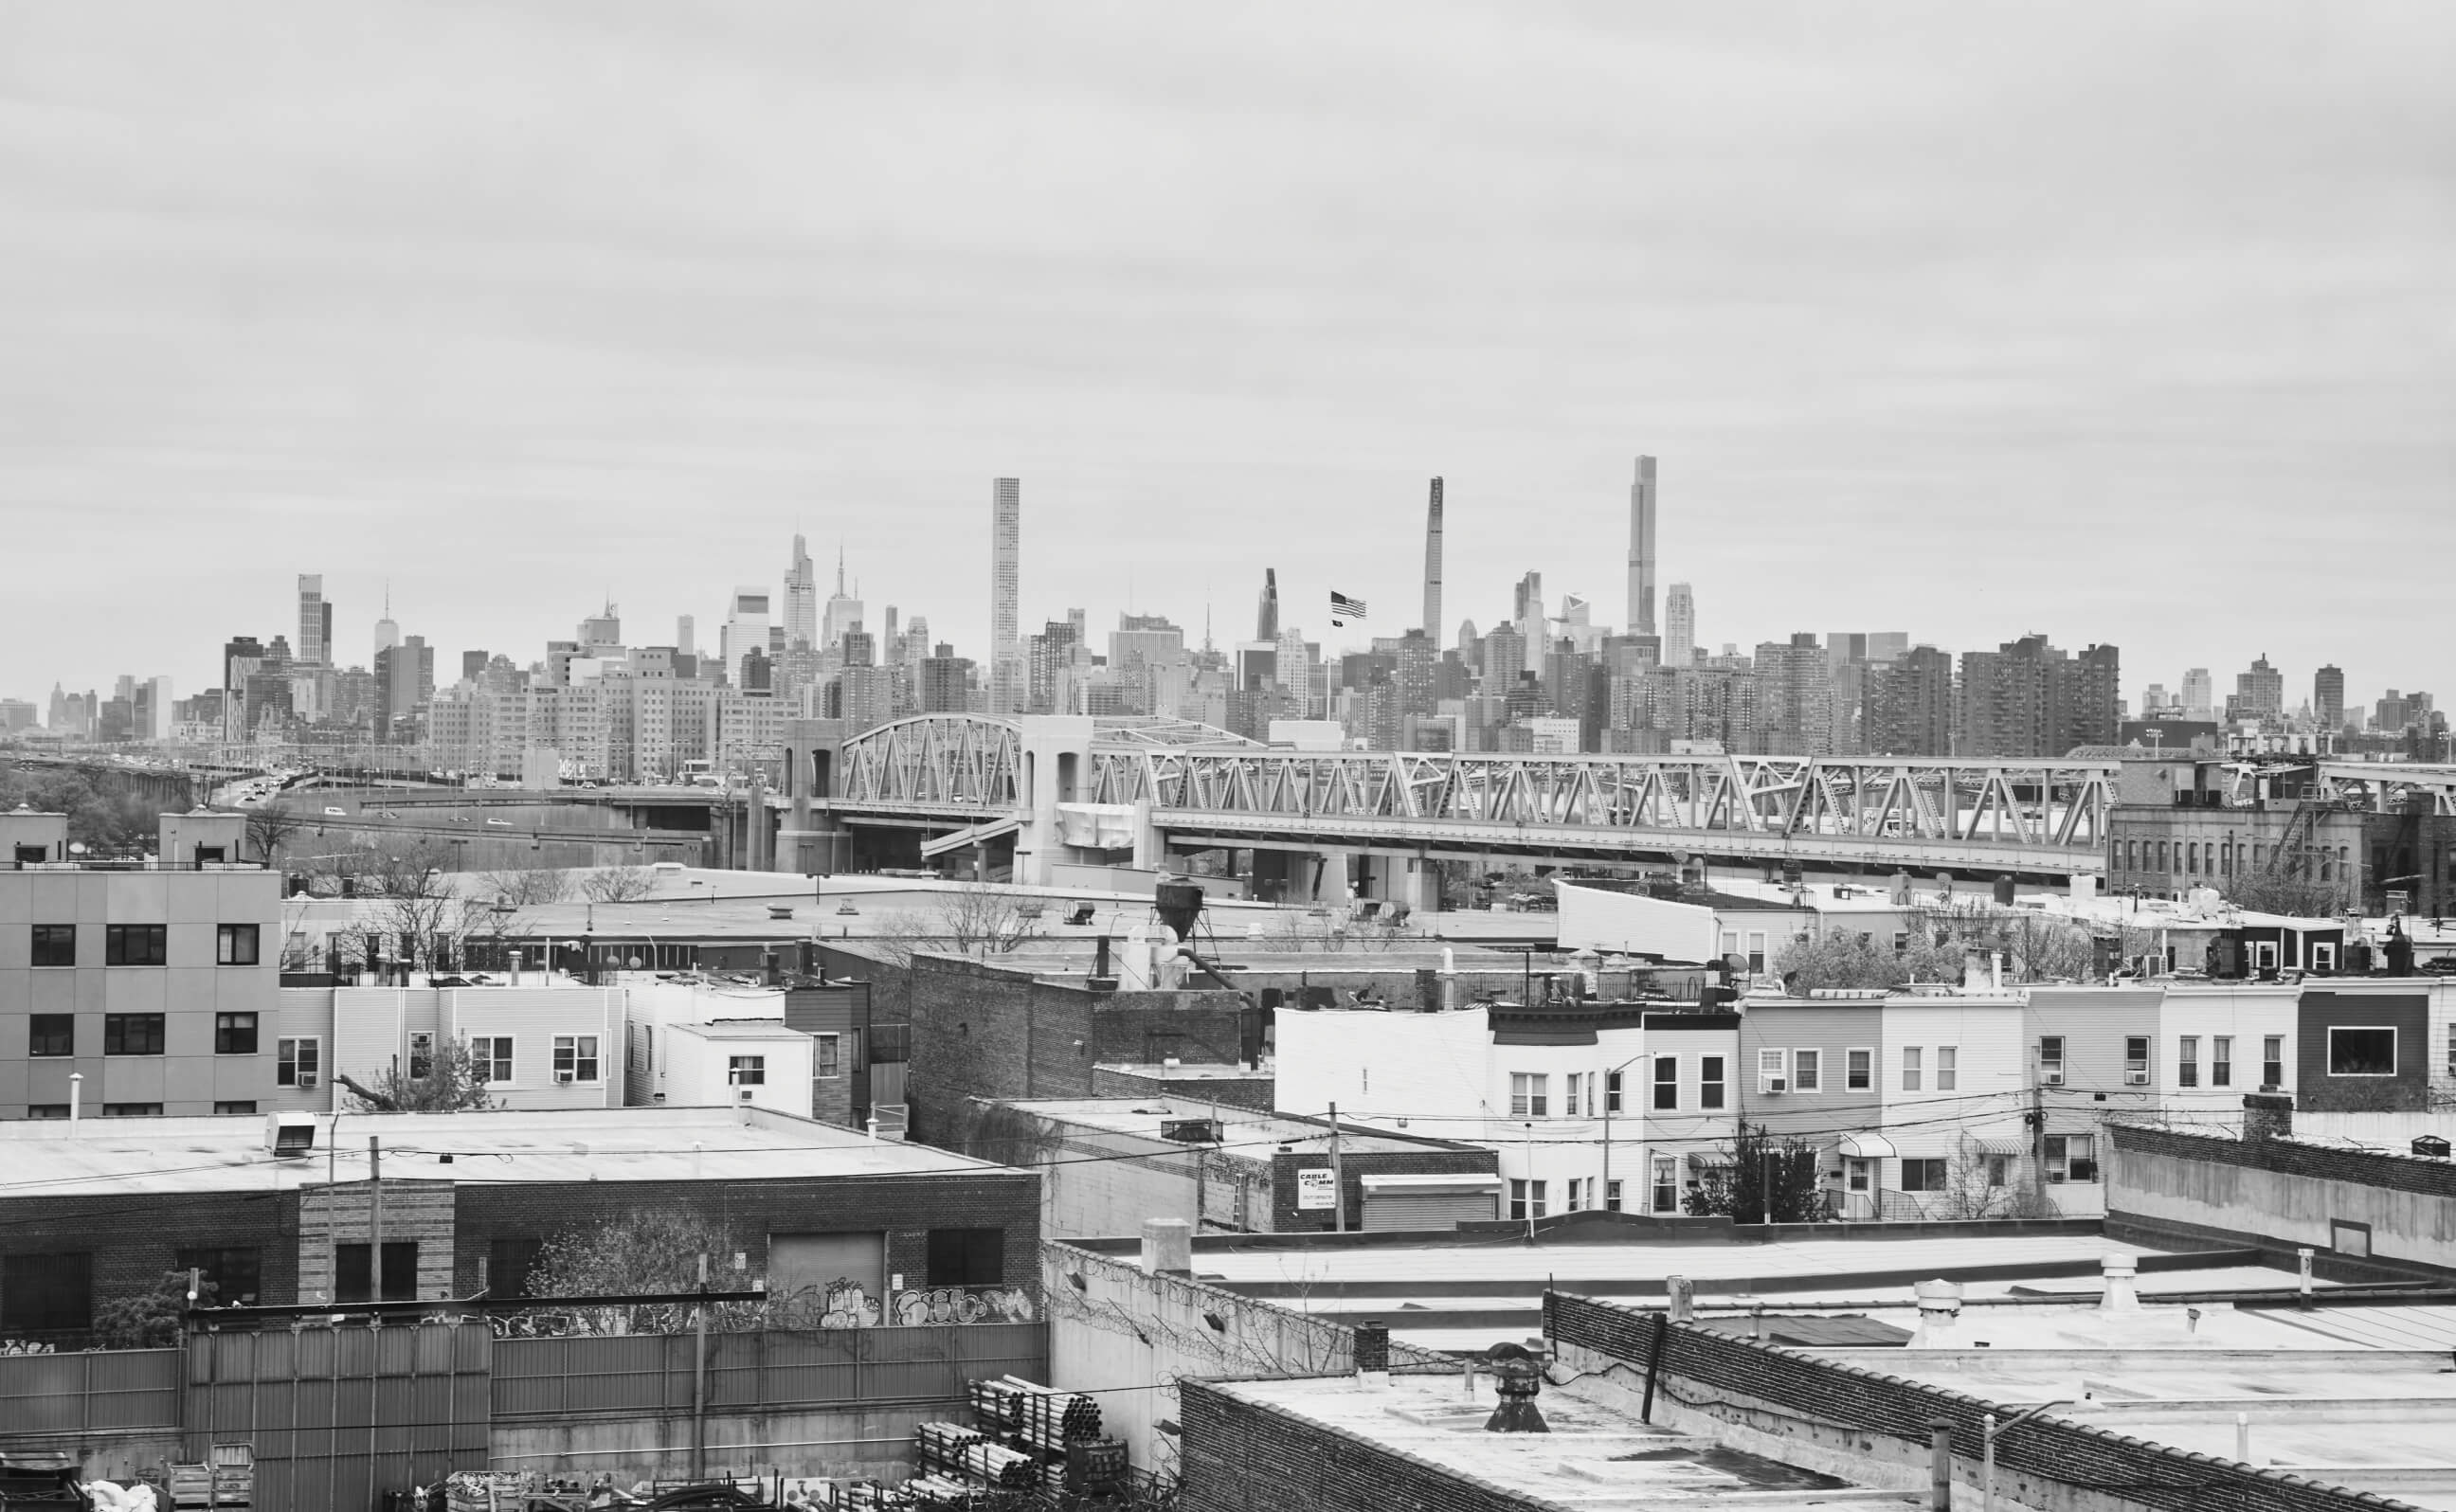 NYC Skyline in black and white